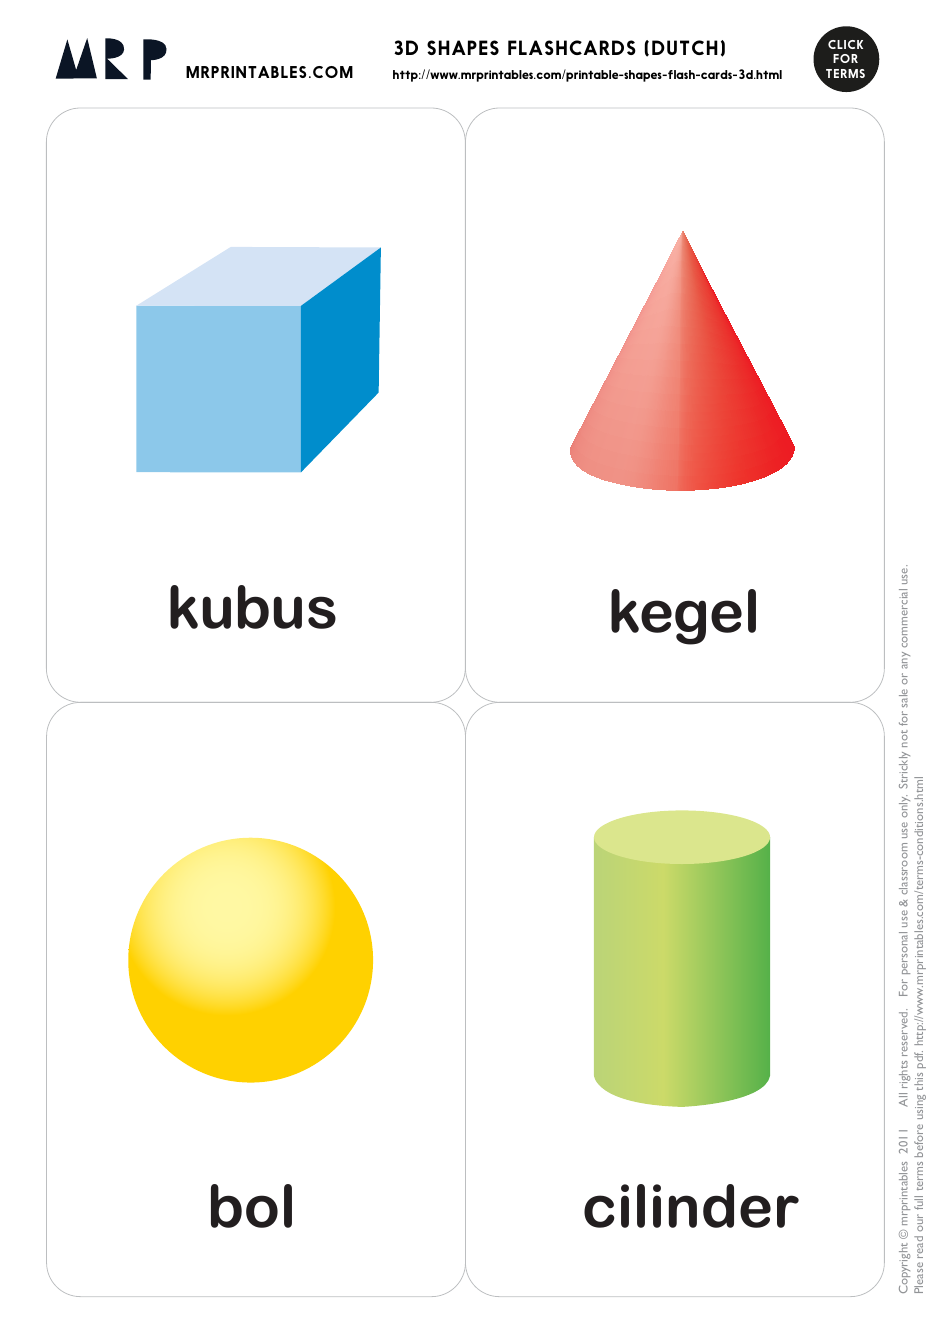 Dutch Flashcards - 3d Shapes, Page 1